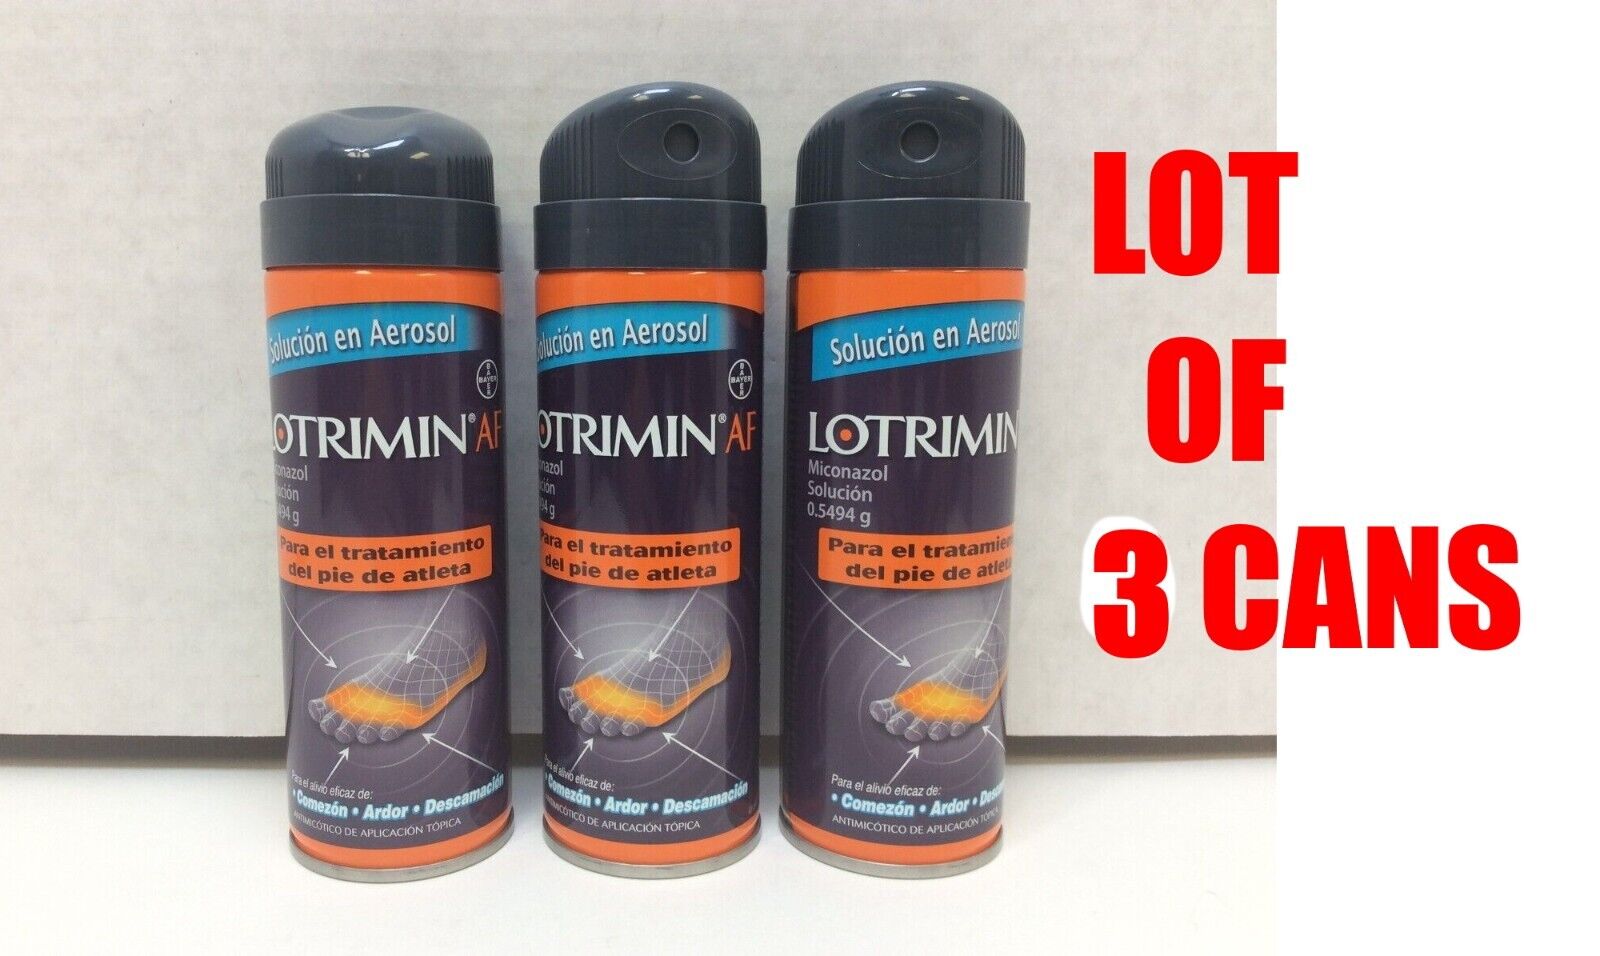 Lotrimin AF Anti-Fungal Clinically Proven To Cure Athlete's Foot, 06/23 LOT OF 3 Lotrimin